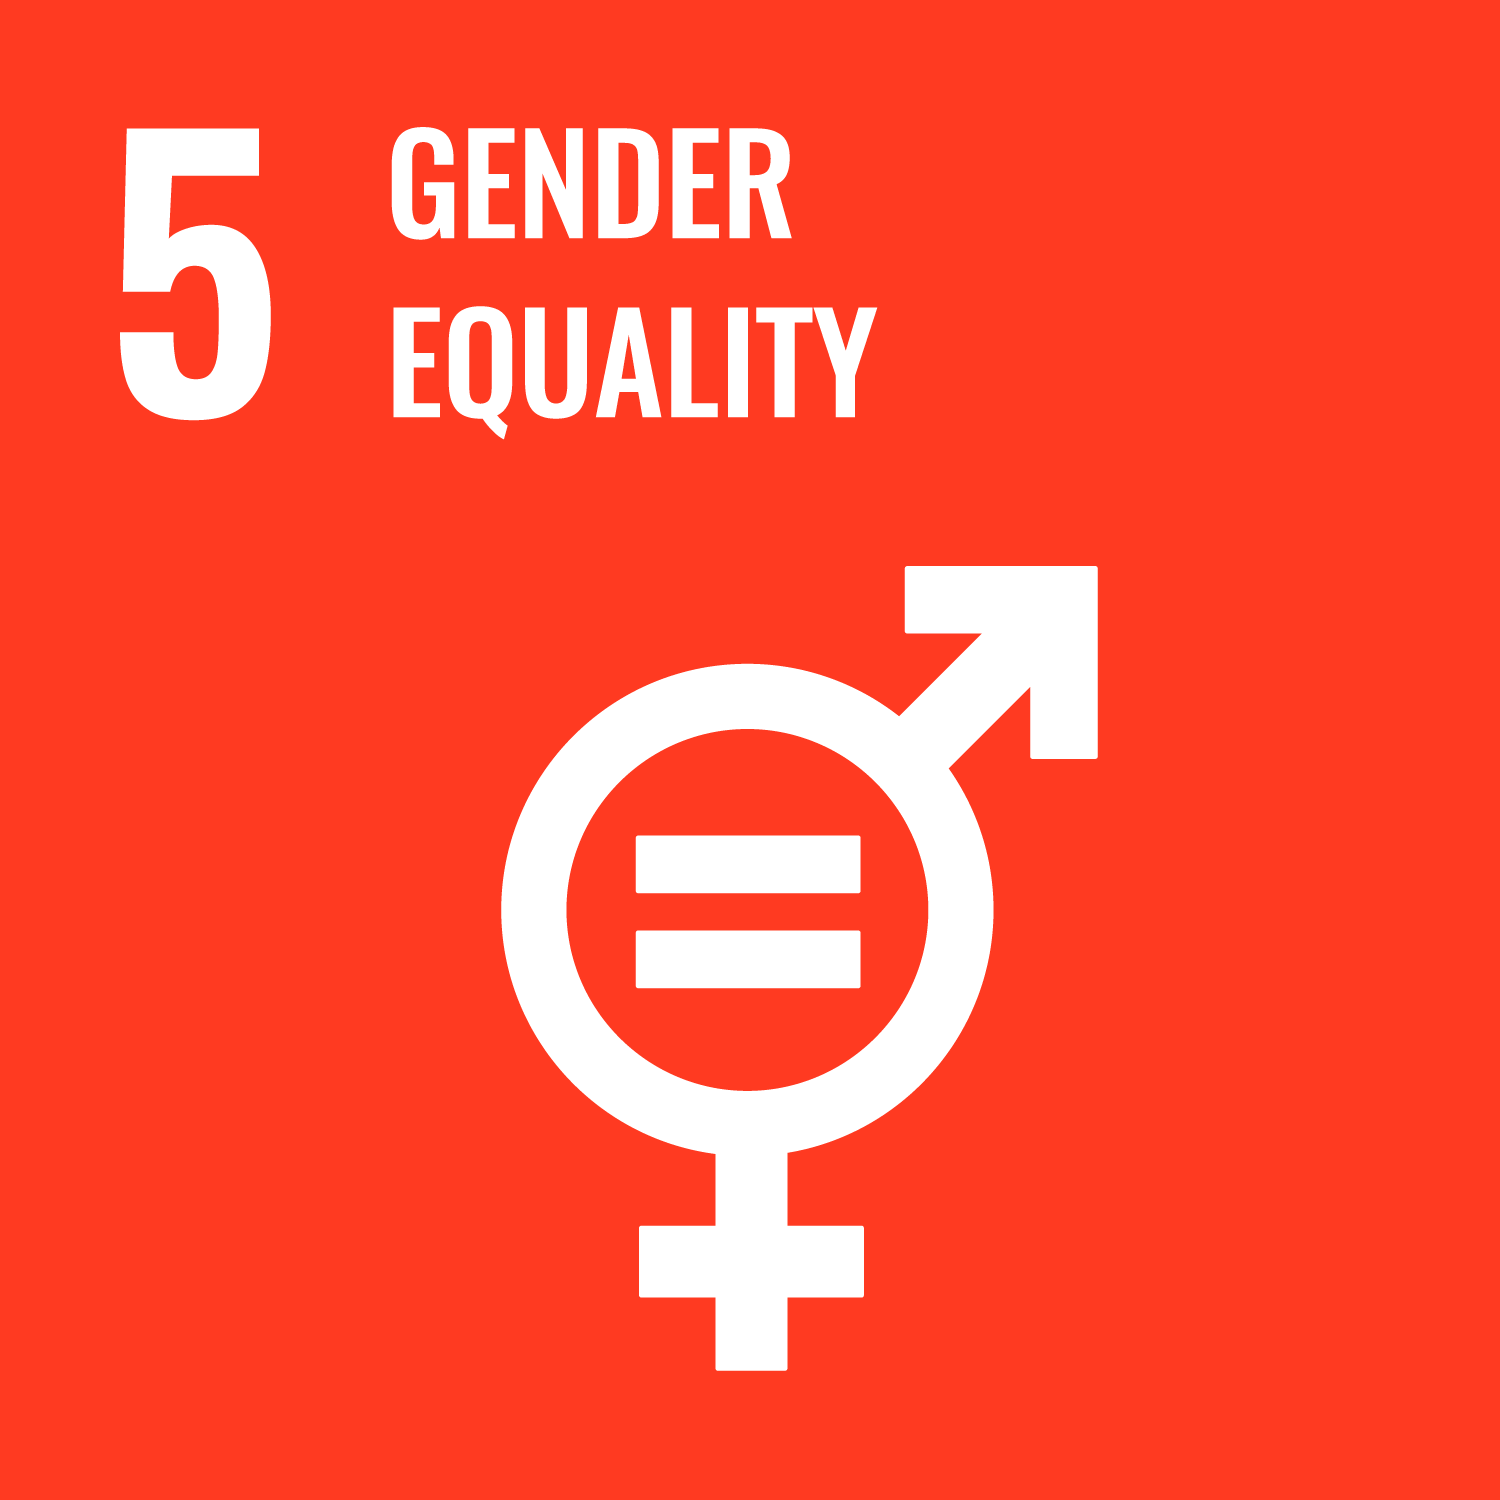 SDG 5: Achieve gender equality and empower all women and girls